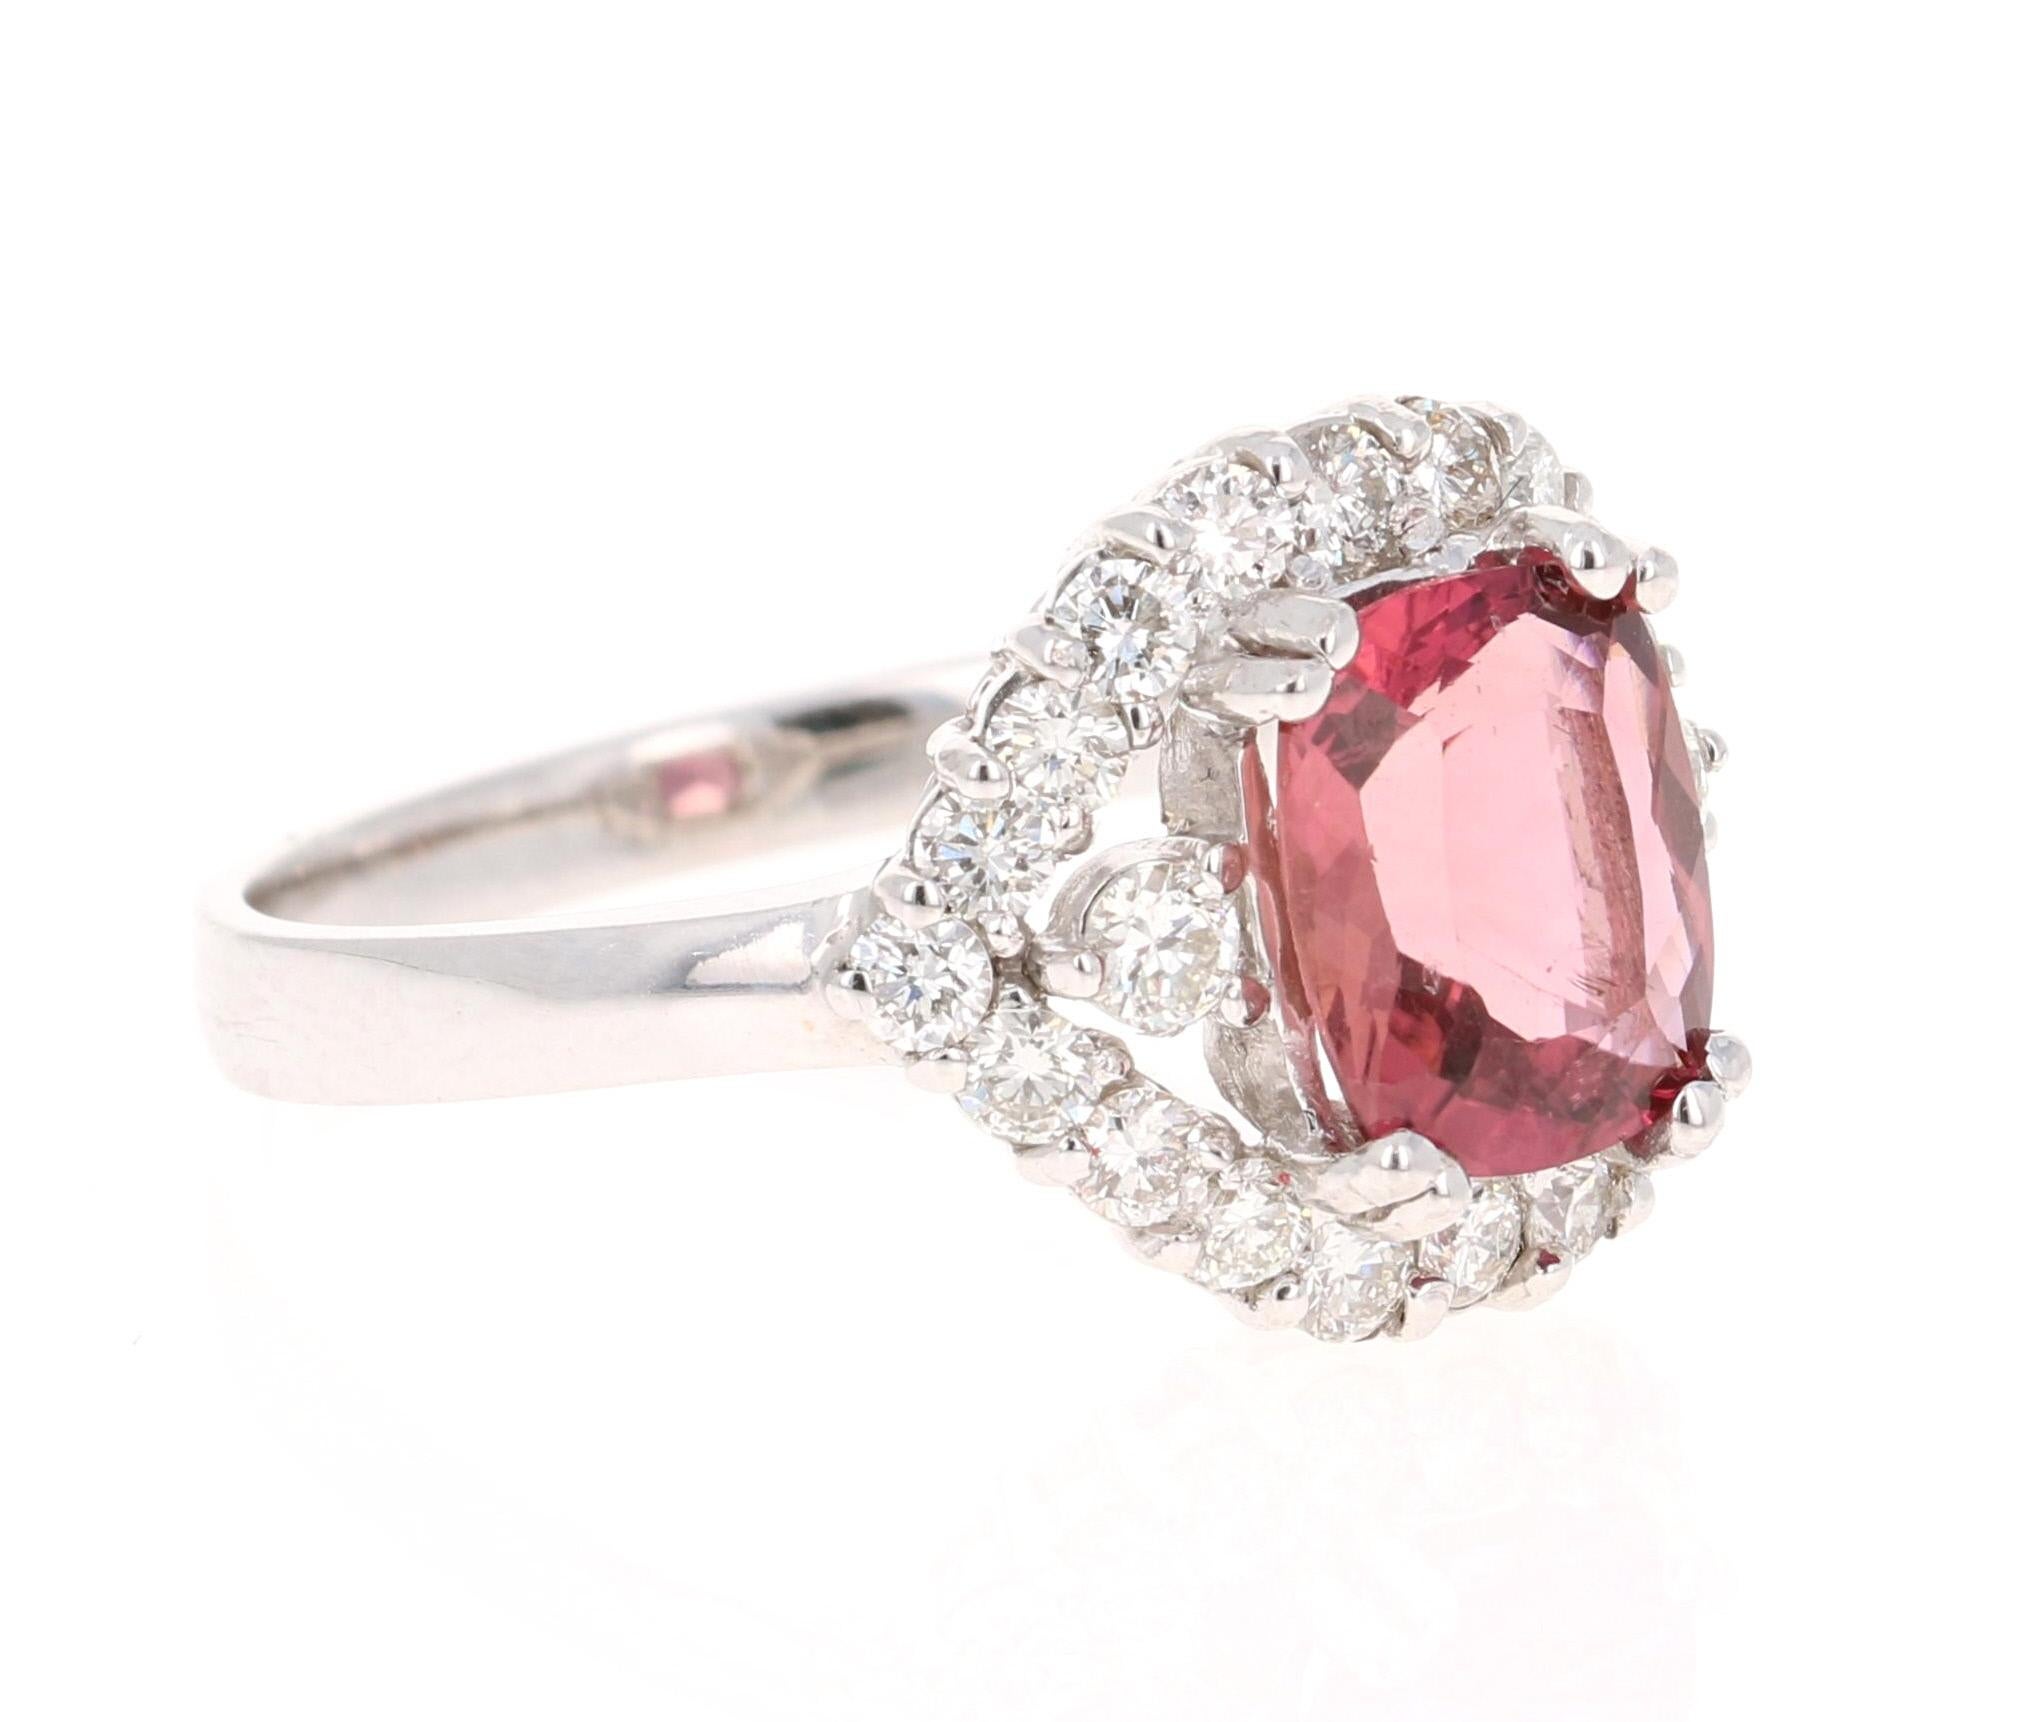 The most beautiful Tourmaline Ring with a delicate design yet a bold color! 

This ring has a Cushion cut 1.87 Carat Tourmaline and is surrounded by 22 Round Cut Diamonds that weigh 0.76 Carats. The total carat weight of the ring is 2.63 Carats.